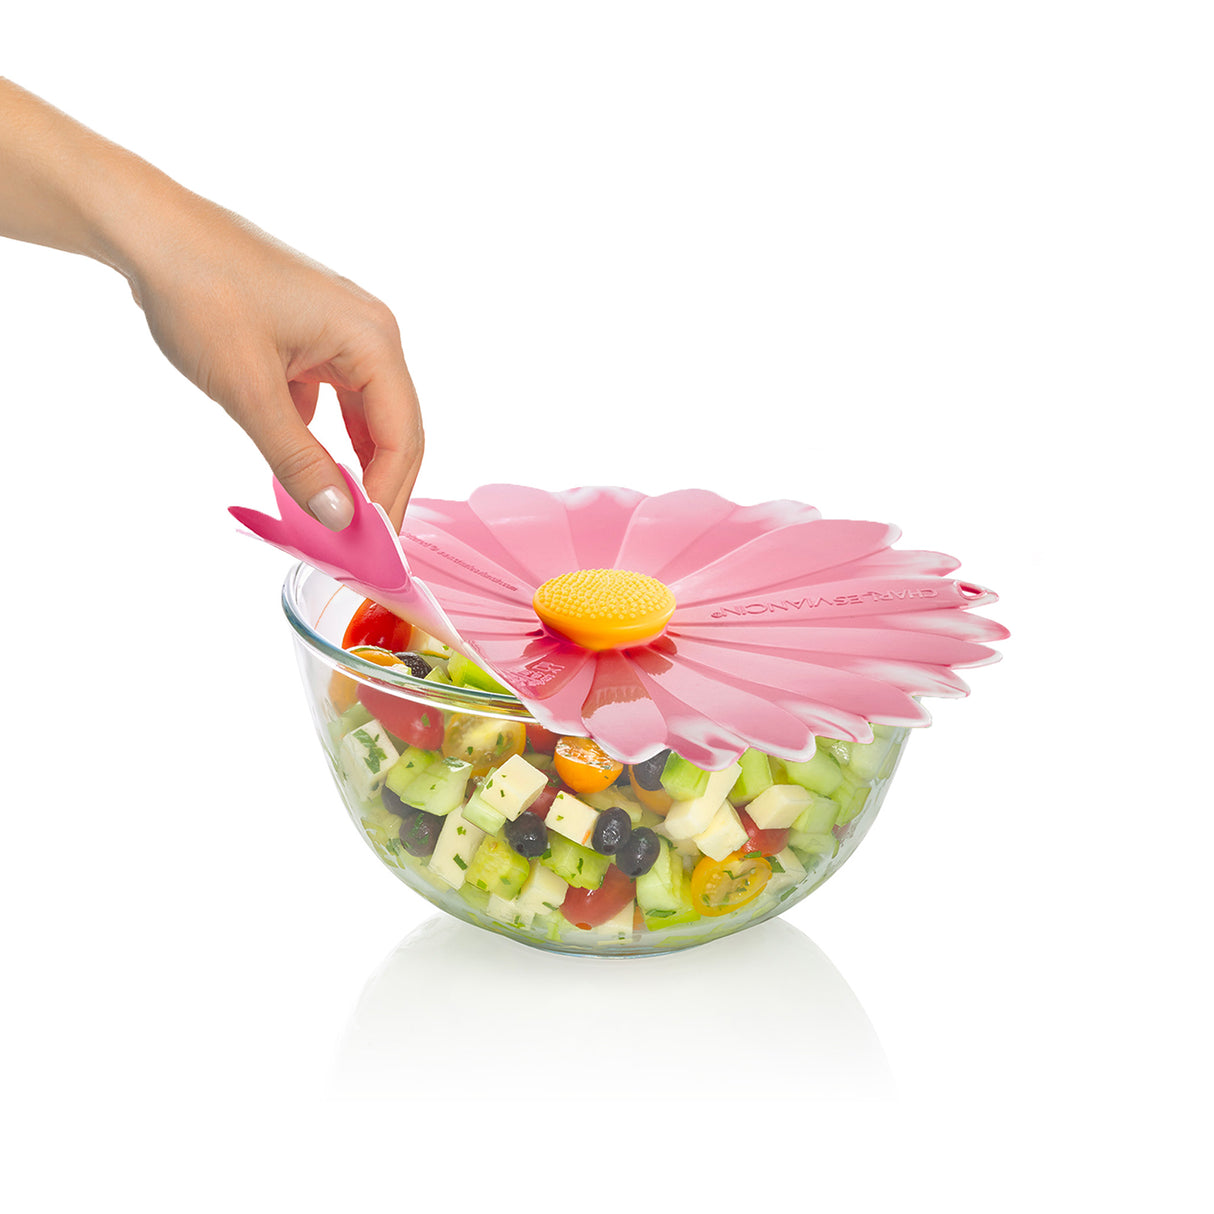 CHARLES-VIANCIN-2513-DAISY-LID-8-PINK-WHITE-SILICONE-HANDLE.jpg